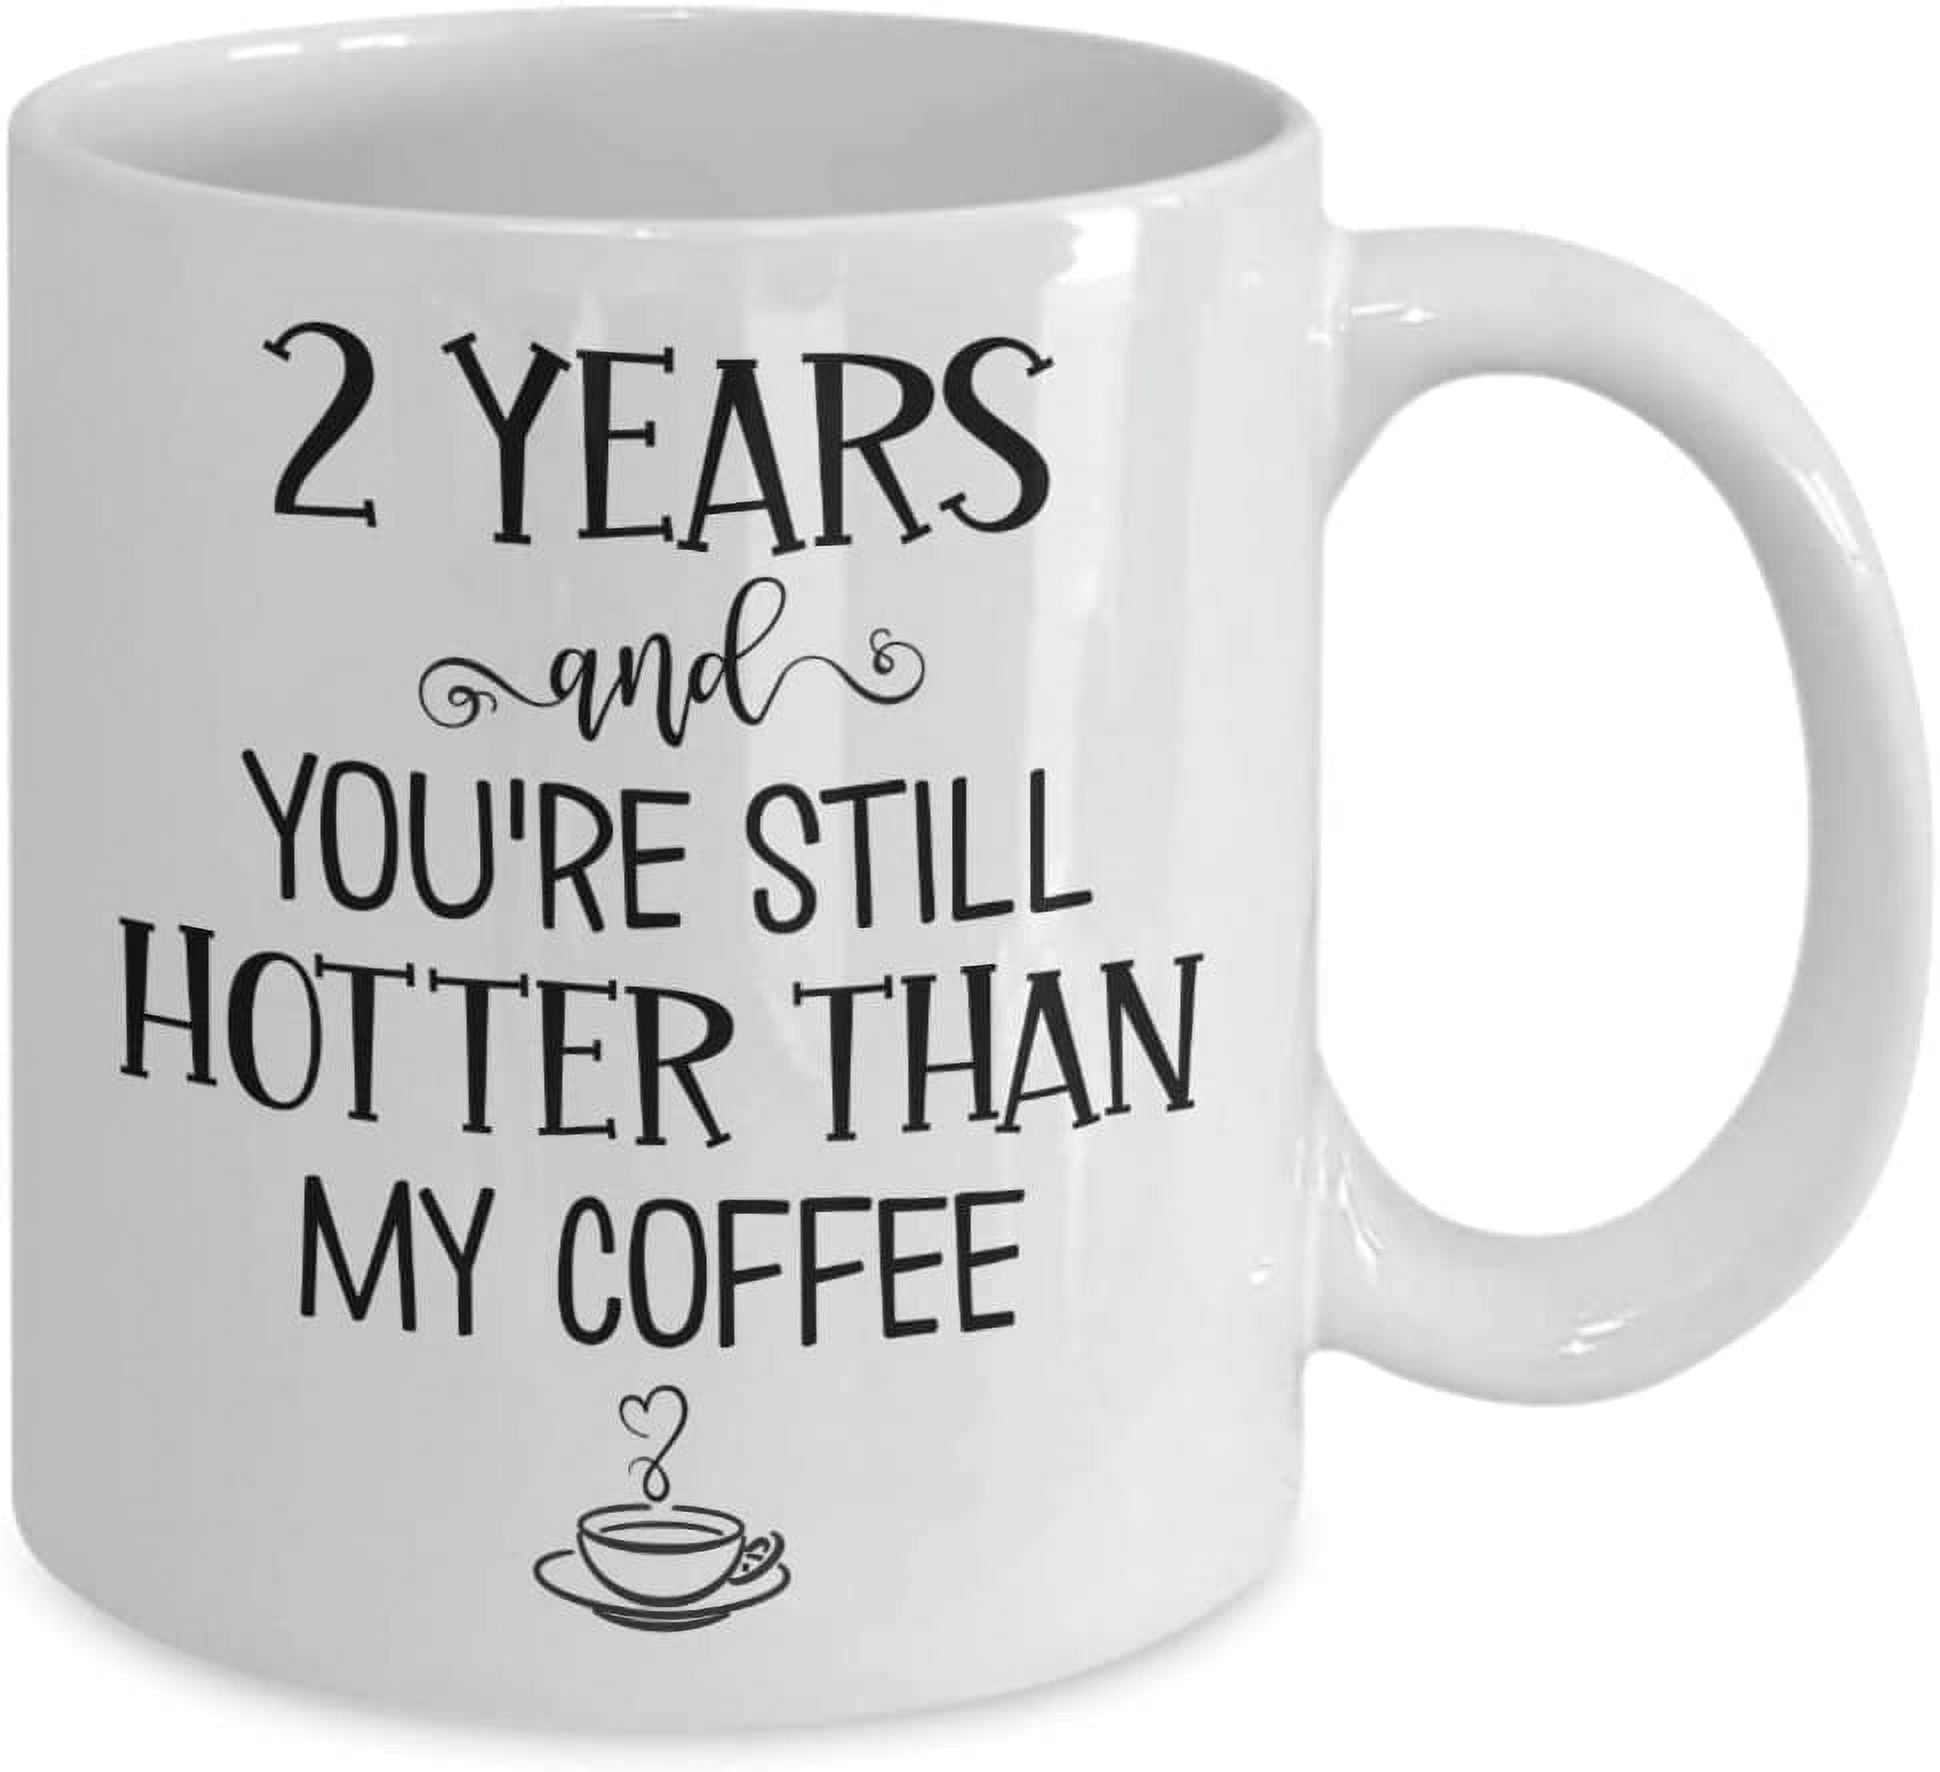 Why My Coffee Is Hotter Than Yours